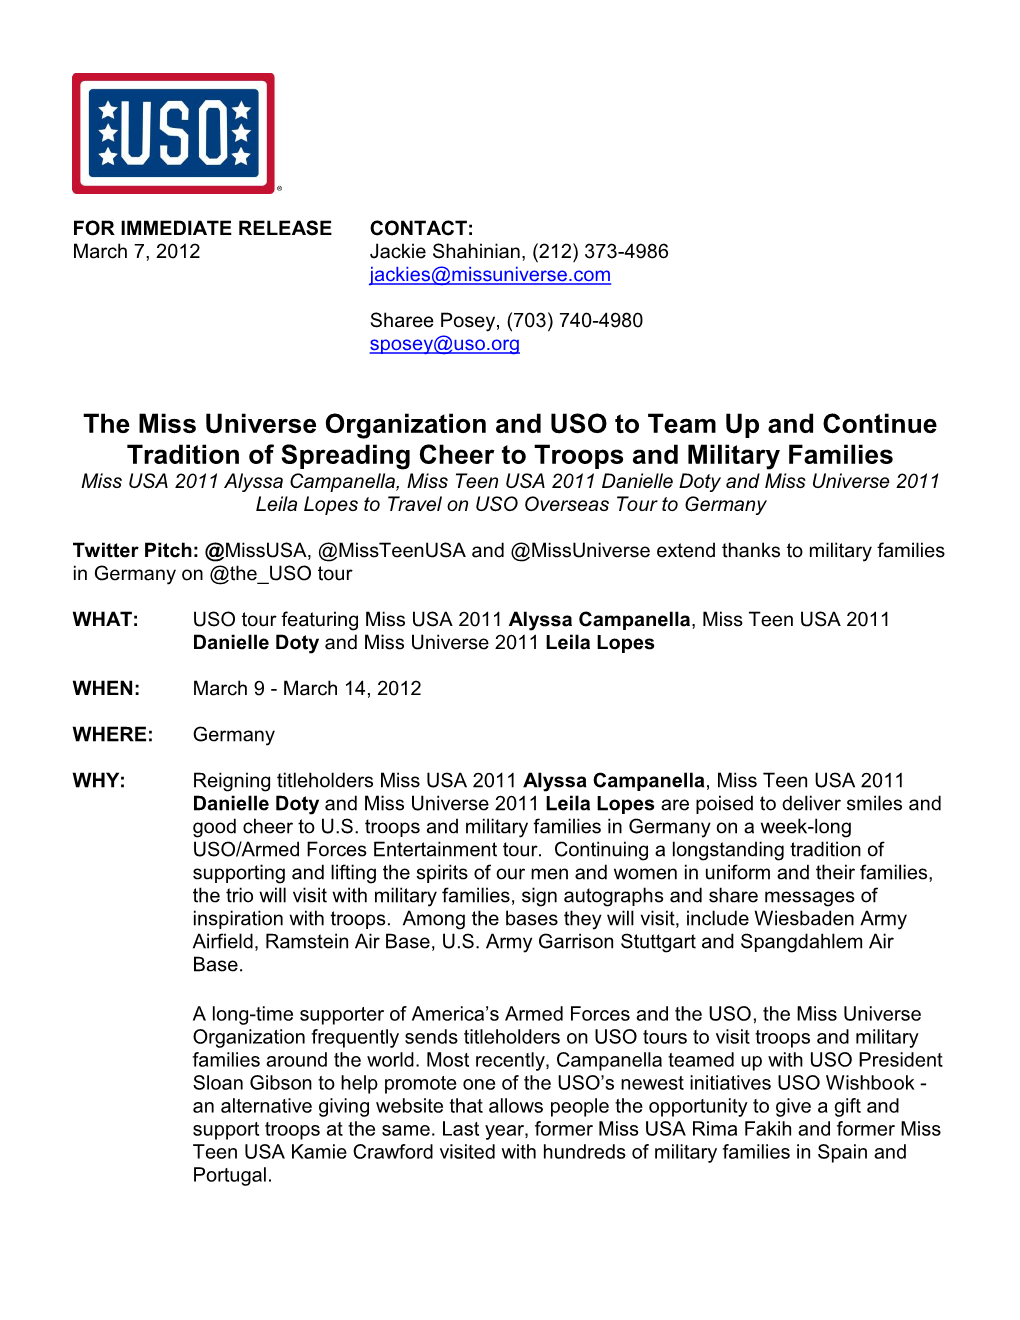 The Miss Universe Organization and USO to Team up and Continue